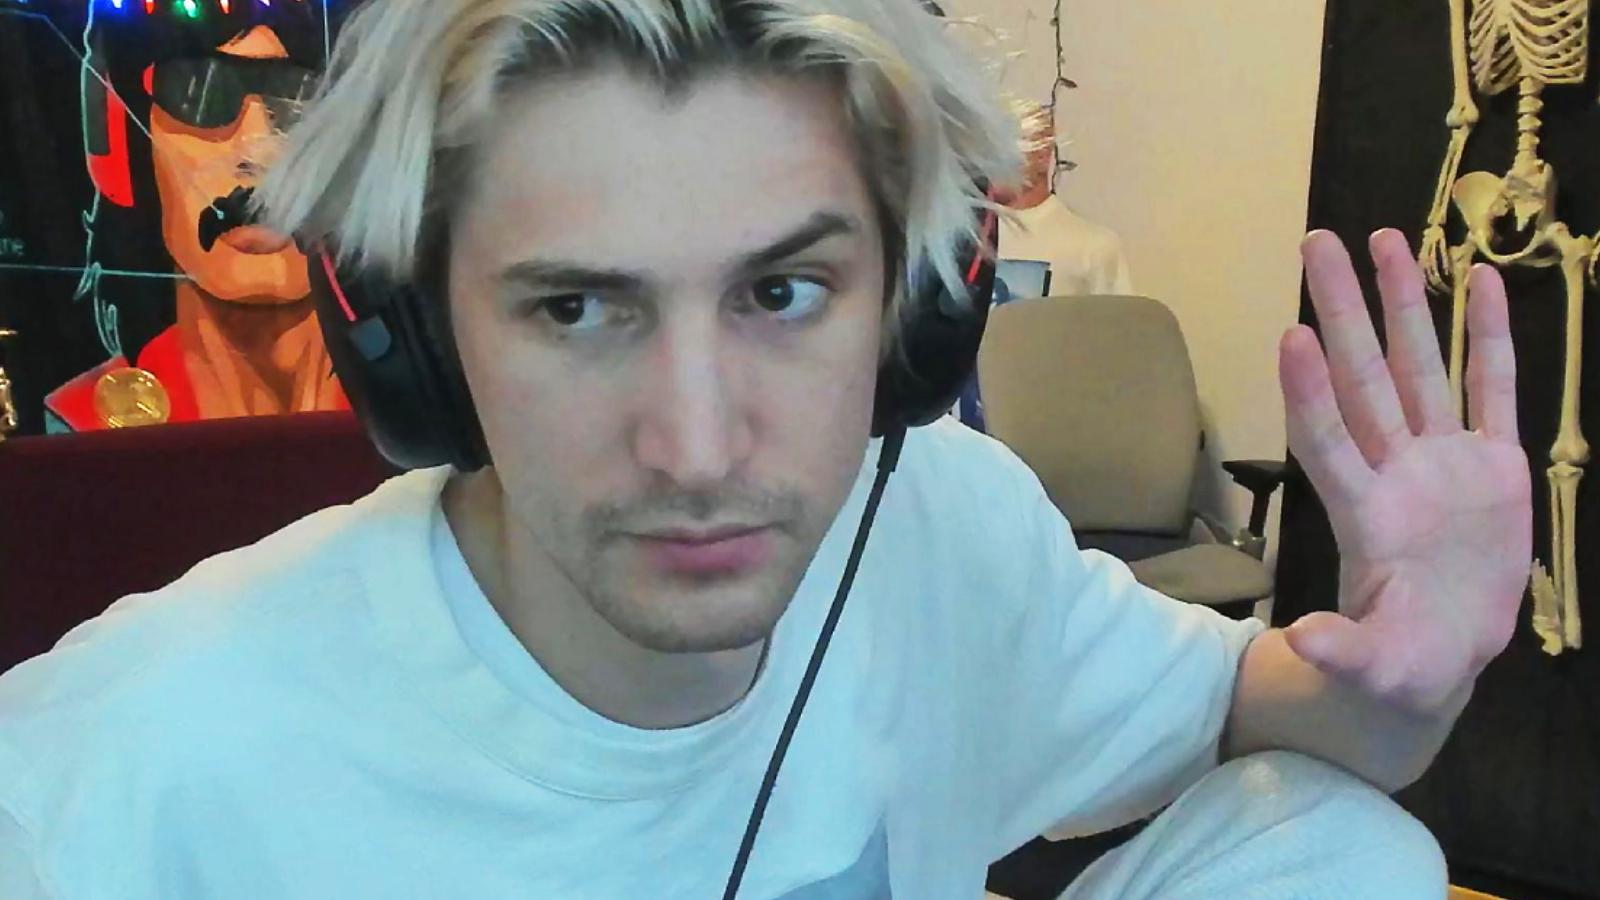 xqc rules out onlyfans content